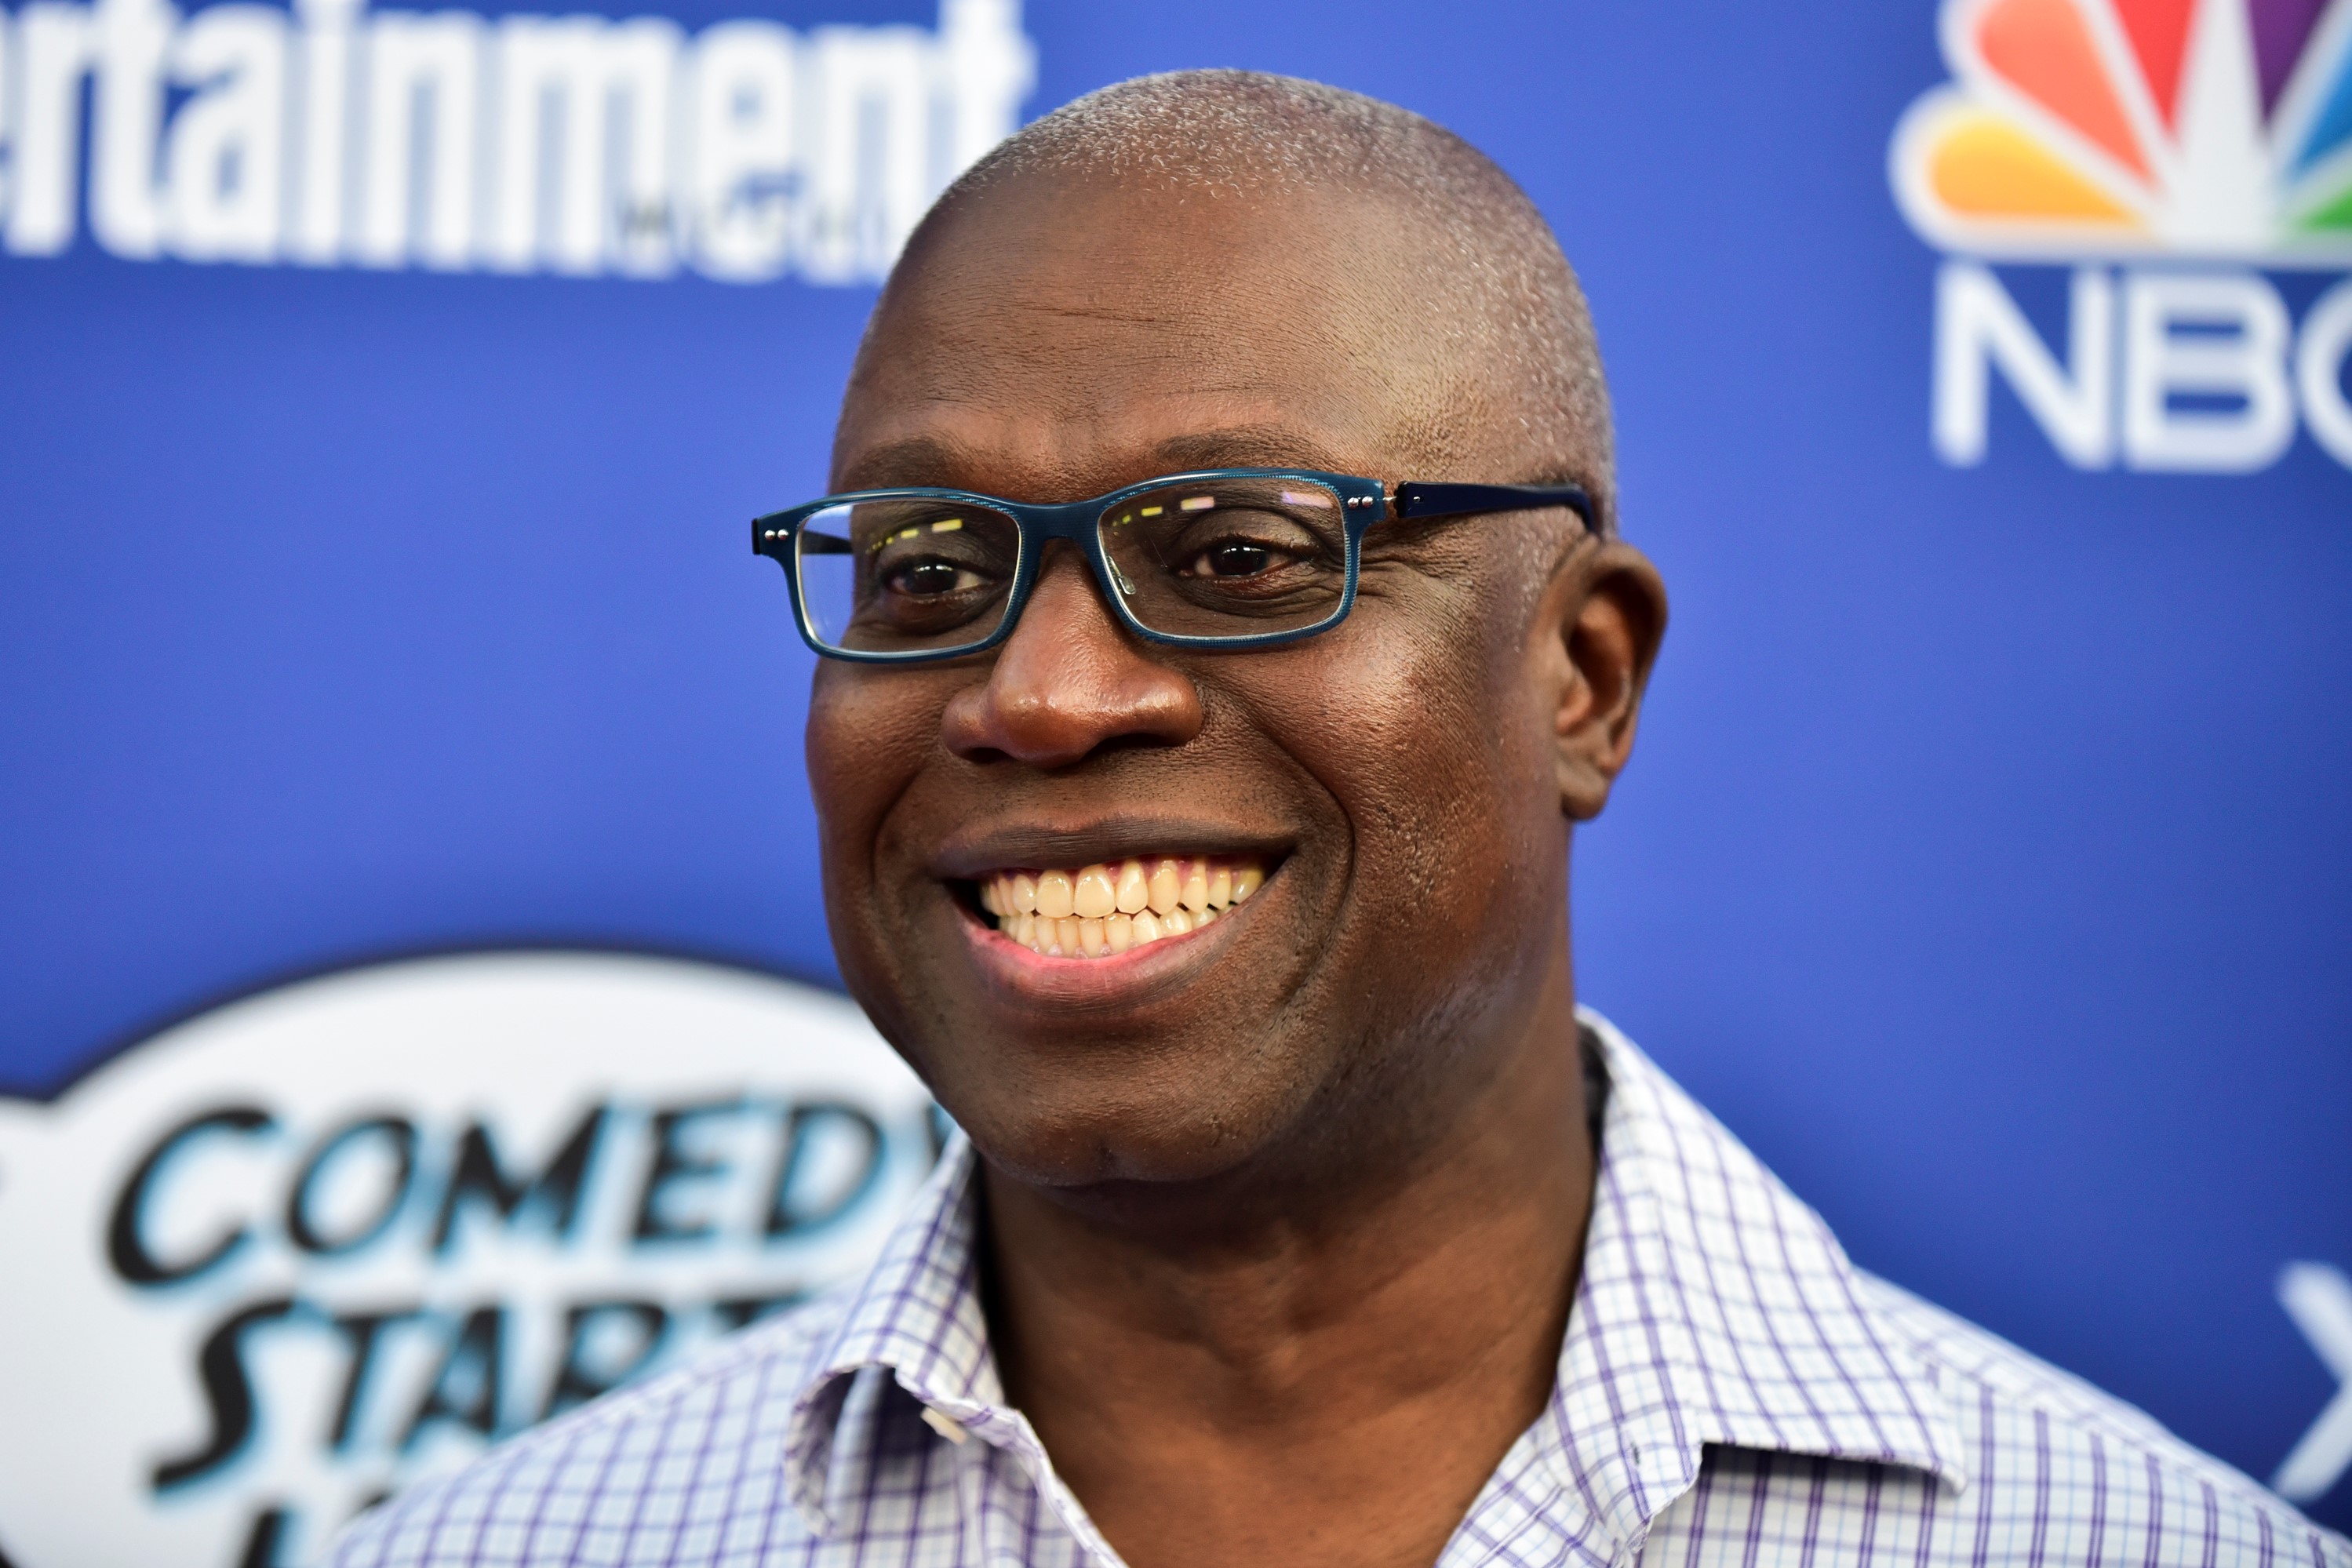 LOS ANGELES, CALIFORNIA - SEPTEMBER 16: Andre Braugher attends NBC's Comedy Starts Here at NeueHouse Hollywood on September 16, 2019 in Los Angeles, California.